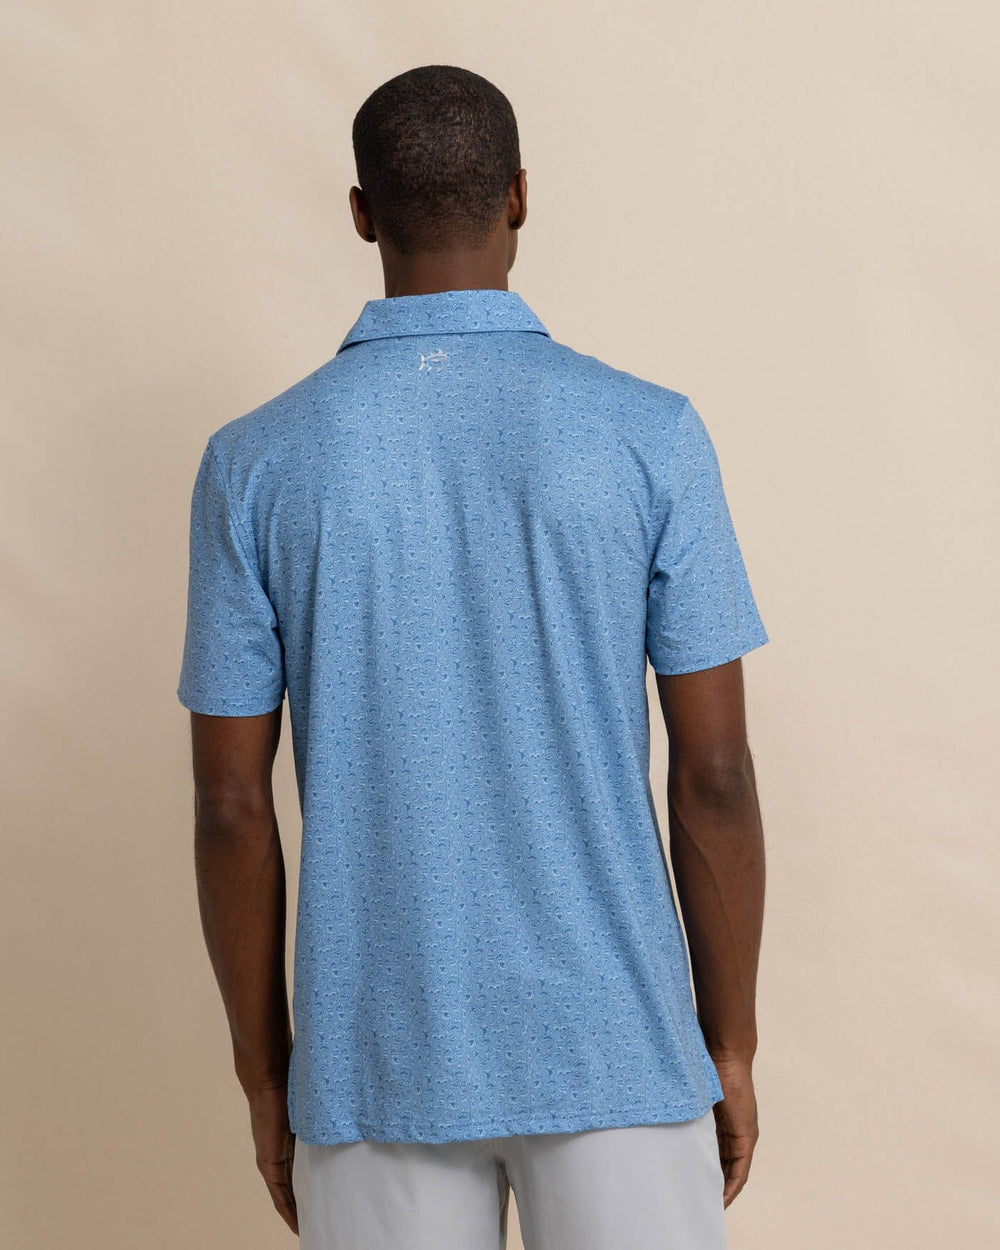 The back view of the Southern Tide Driver Let's Go Clubbing Printed Polo by Southern Tide - Coronet Blue